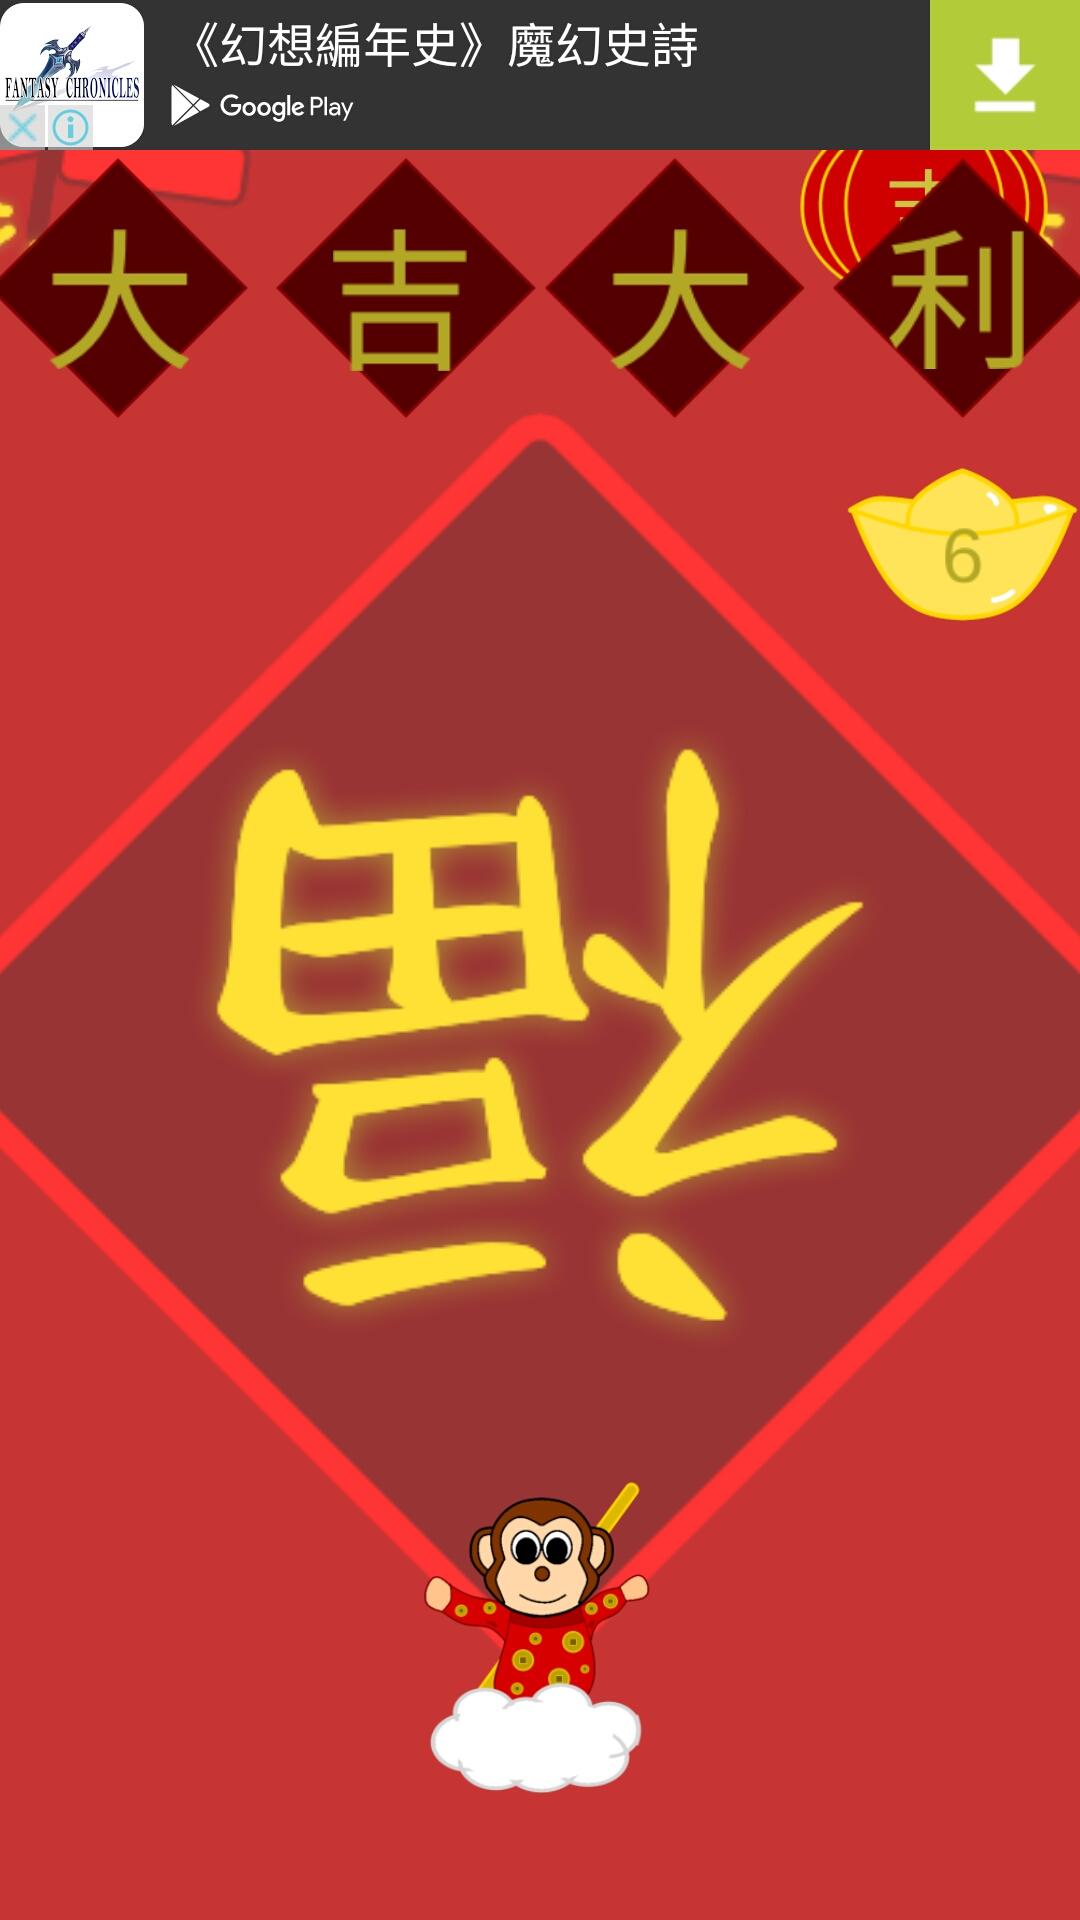 Android application 靈猴獻瑞賀新年 screenshort